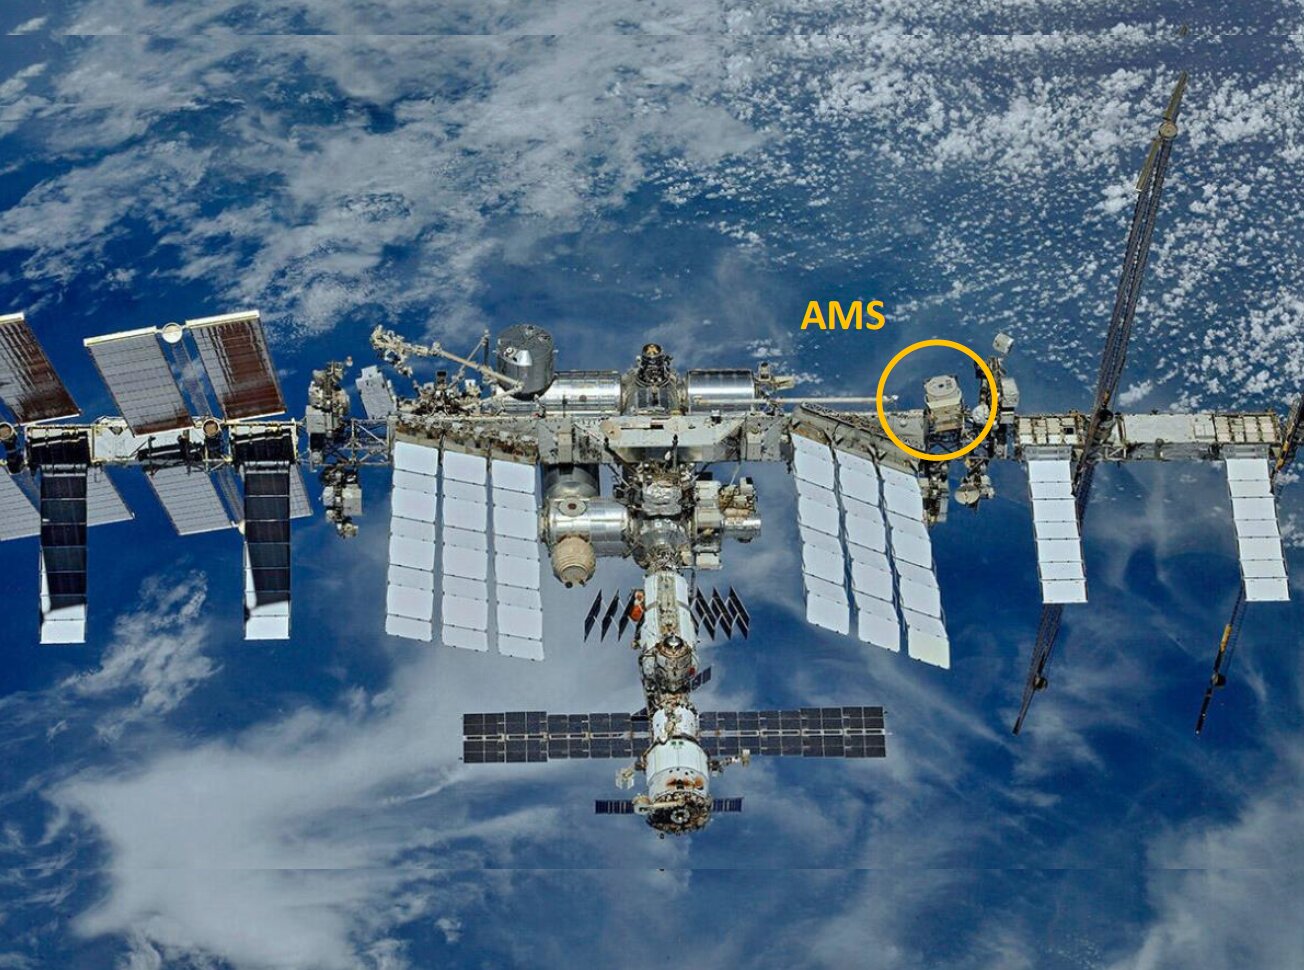 Alpha Magnetic Spectrometer (AMS) on the International Space Station.